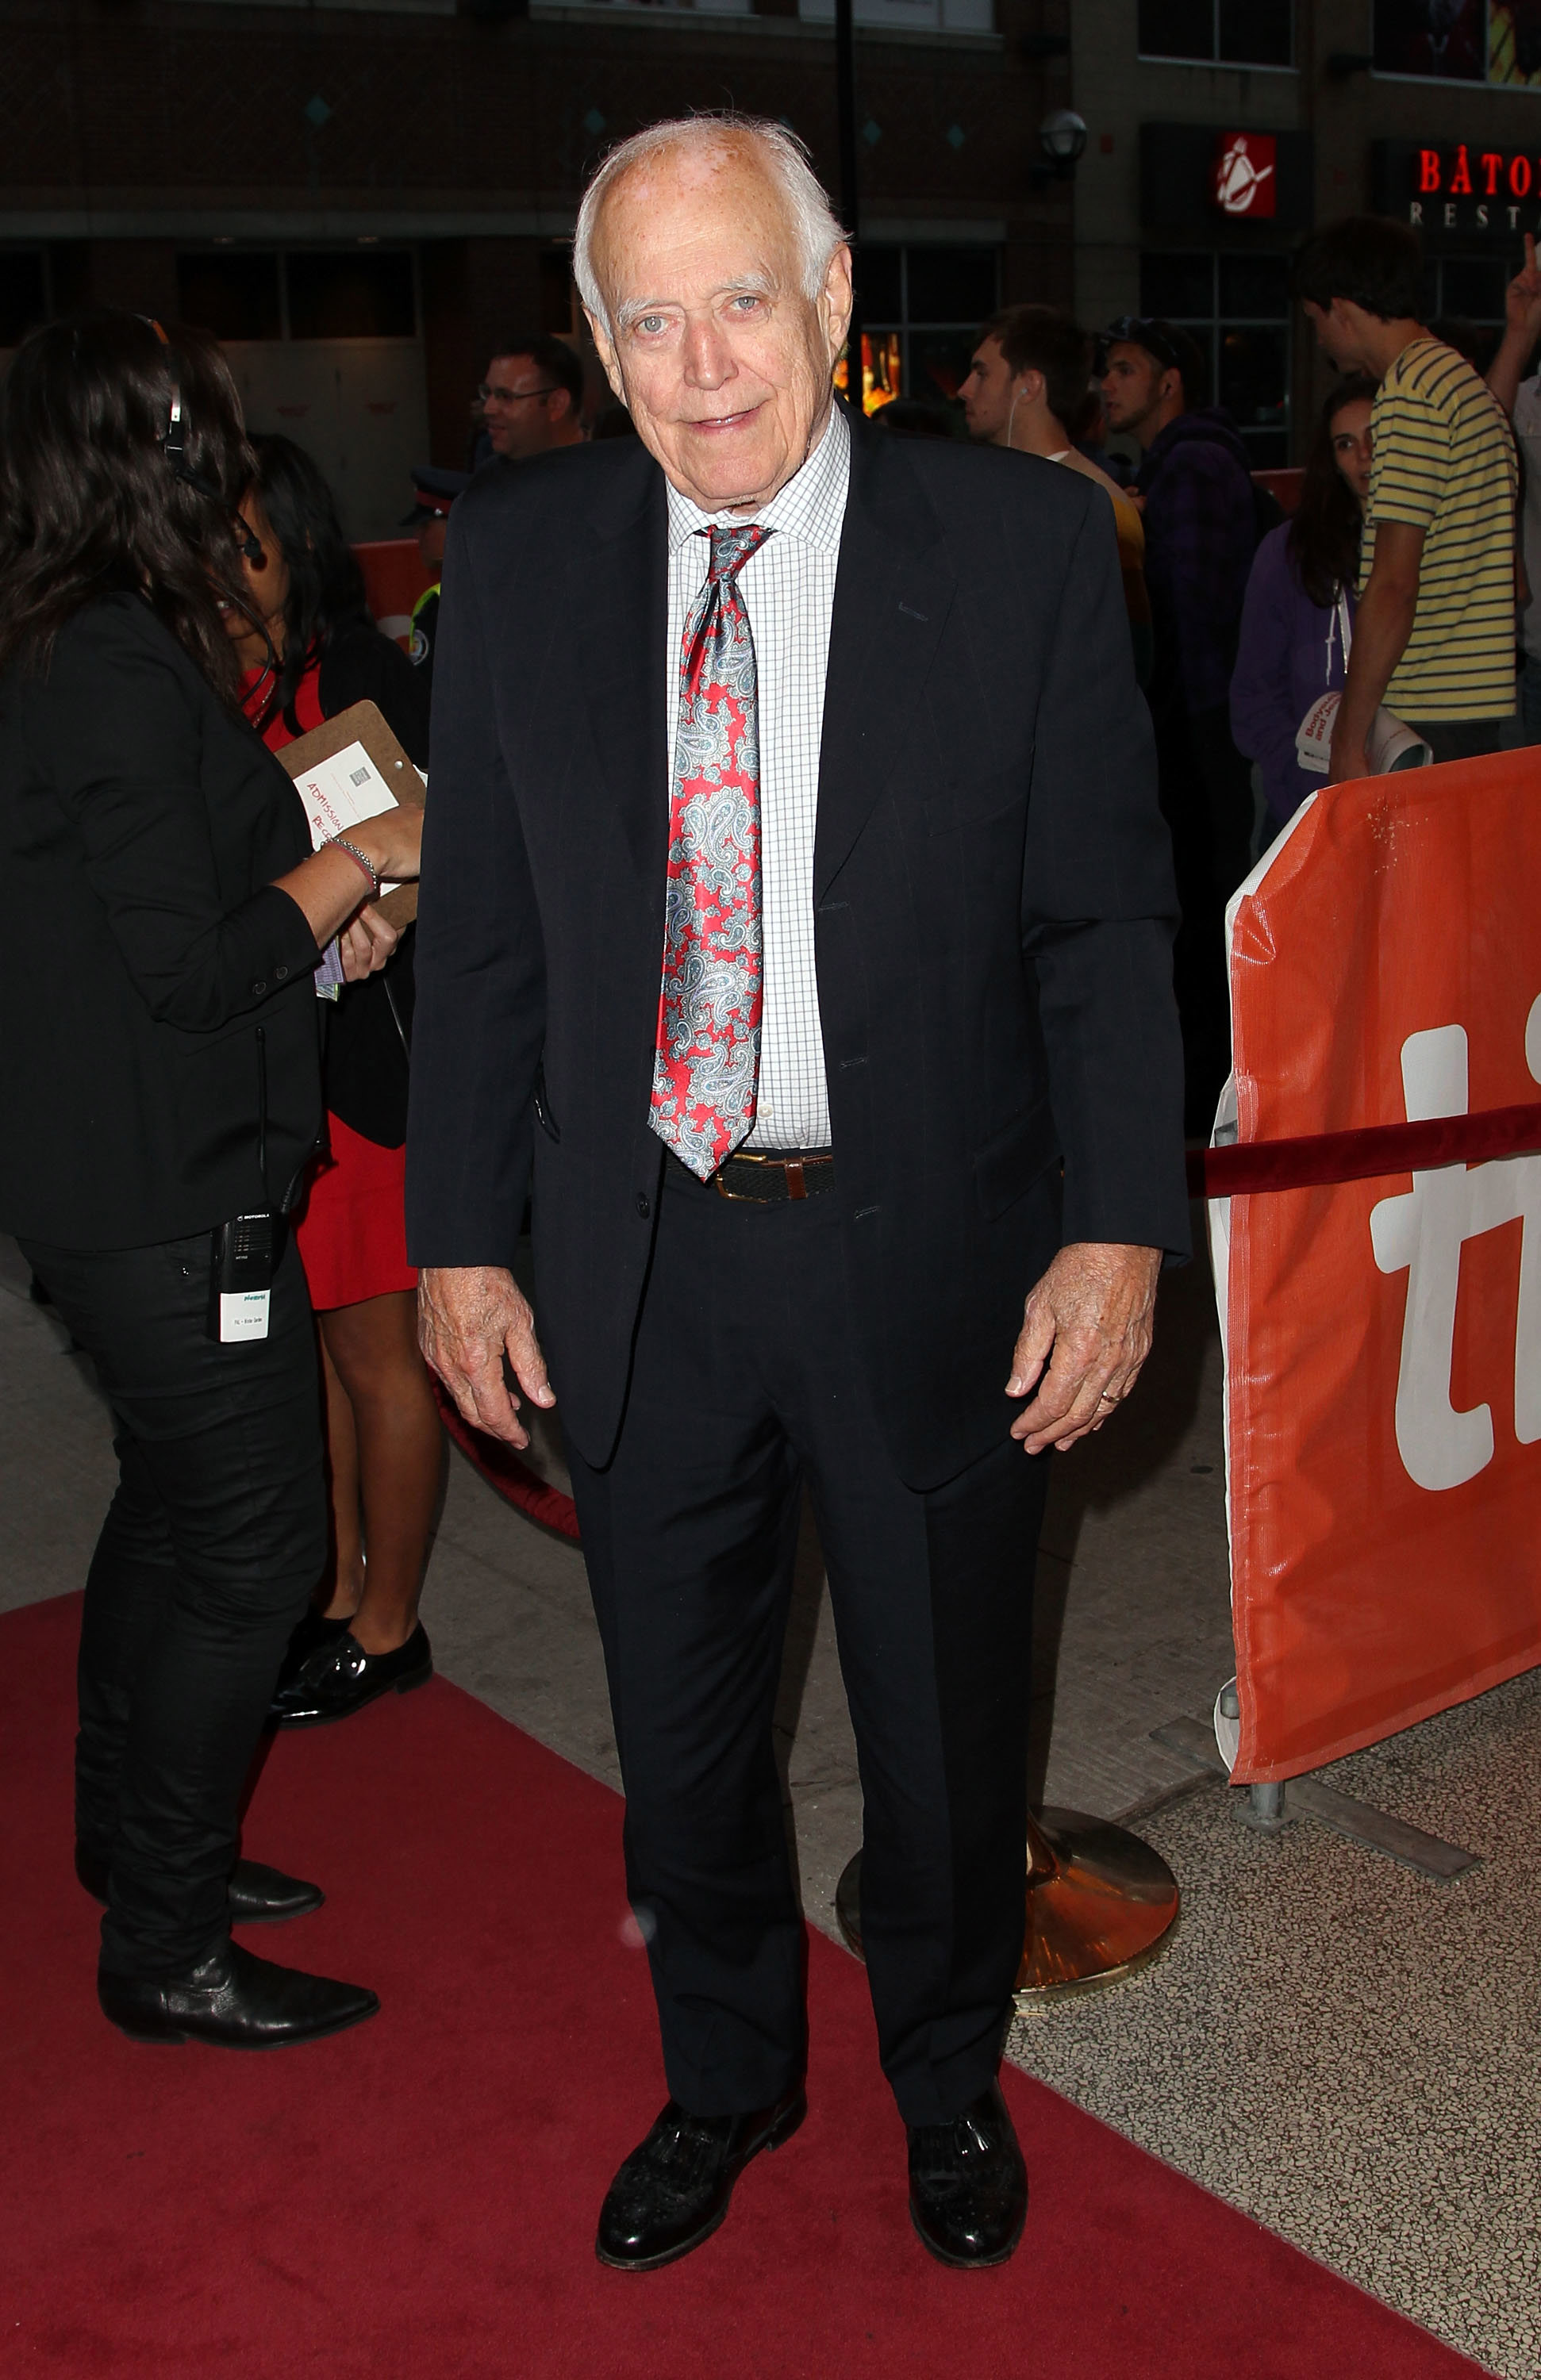 attends the "Still" premiere during the 2012 Toronto International Film Festival at Winter Garden Theatre on September 10, 2012 in Toronto, Canada.